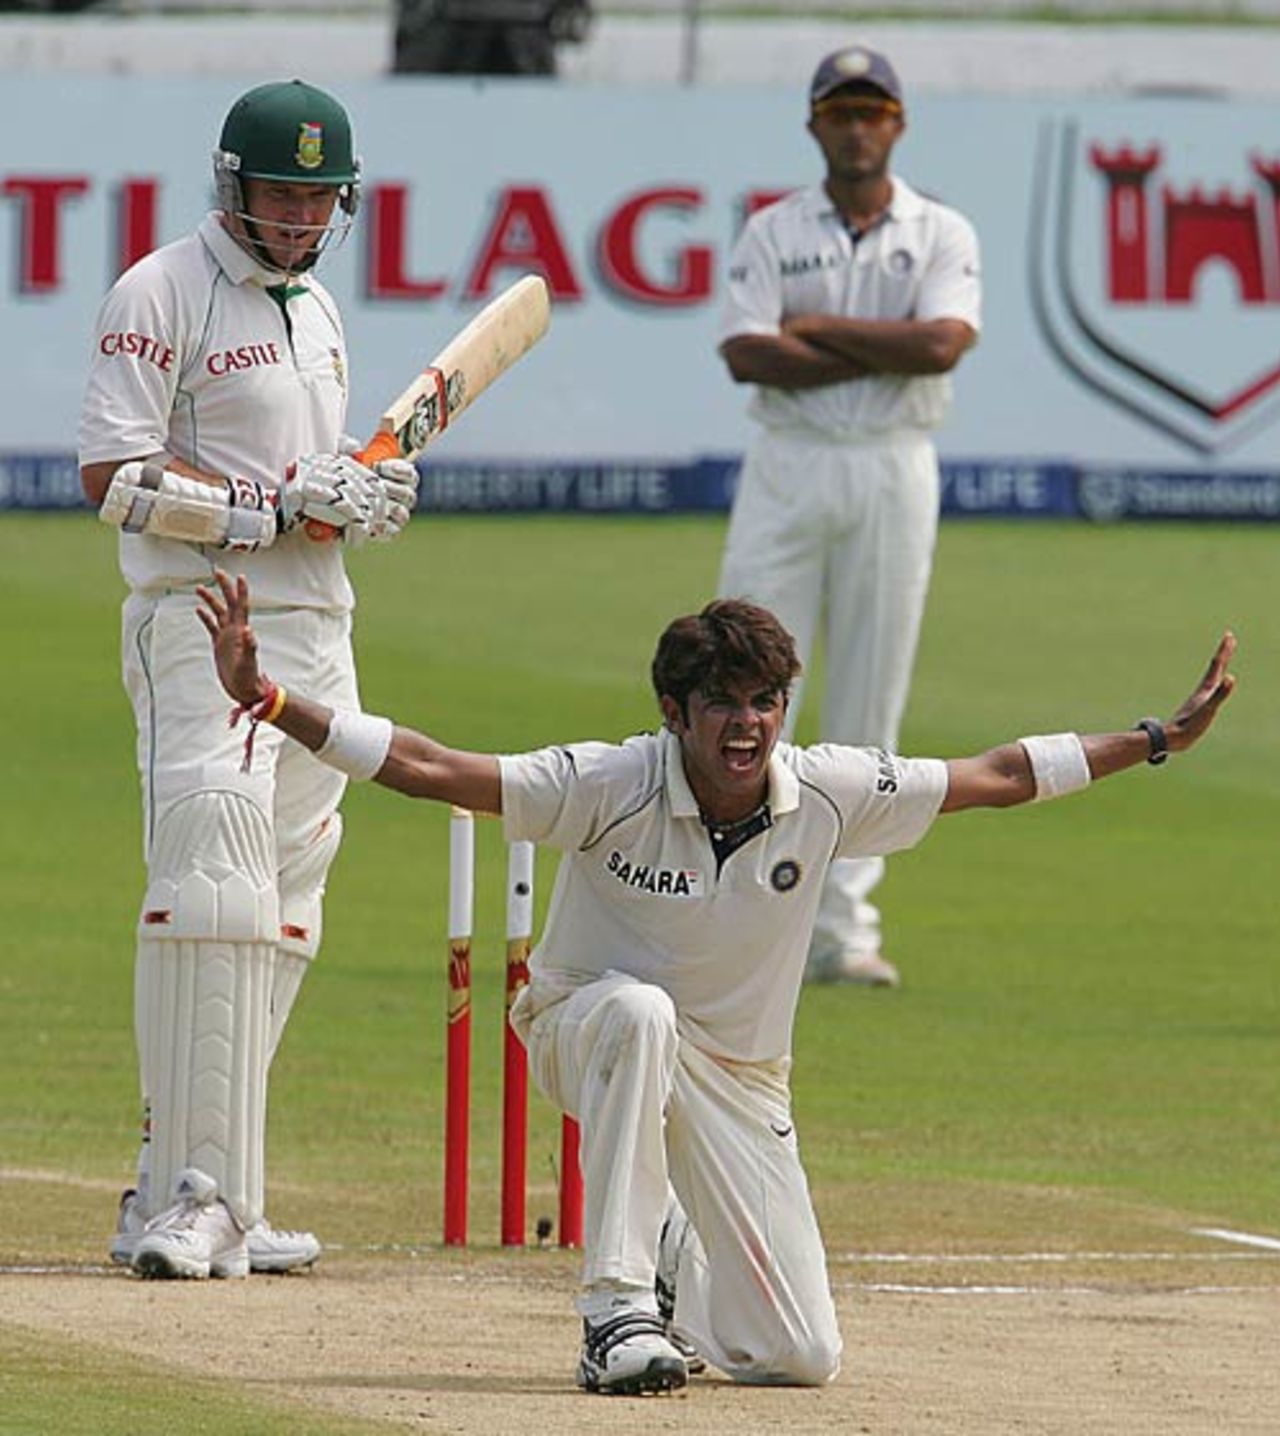 Sreesanth appeals against Graeme Smith, South Africa v India, 2nd Test, Durban, 4th day, December 29, 2006